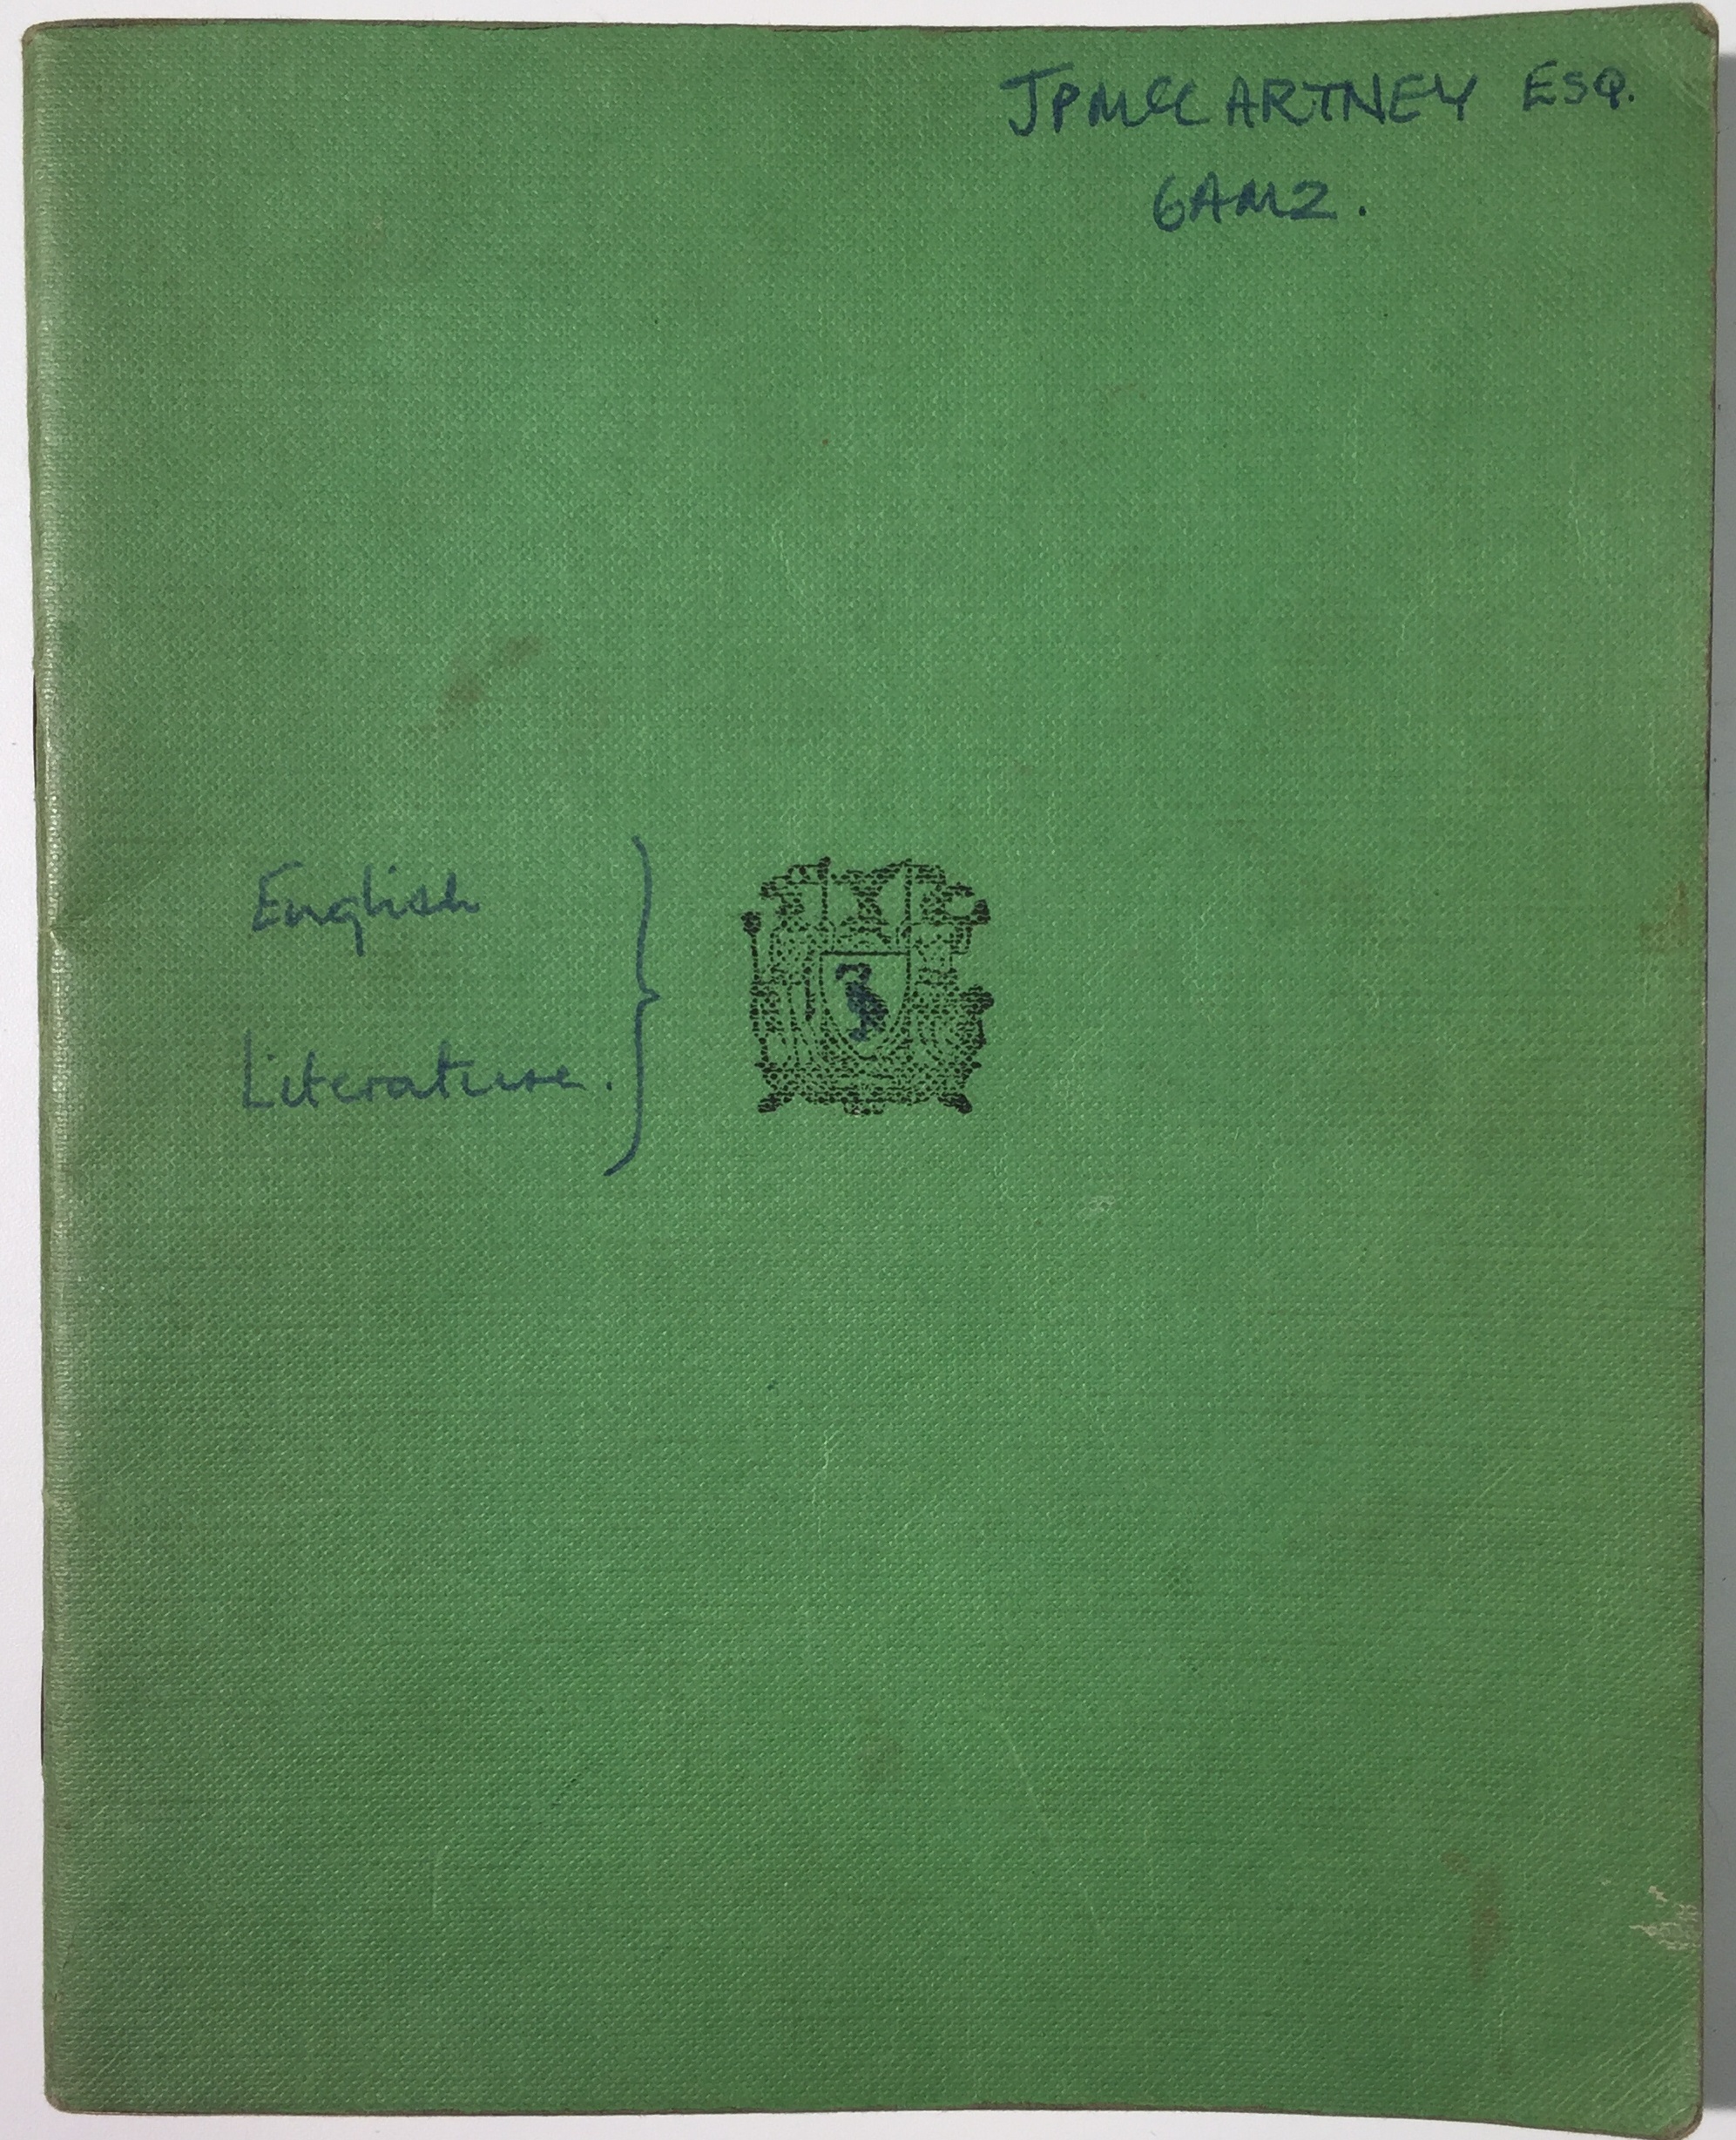 The front of the exercise book